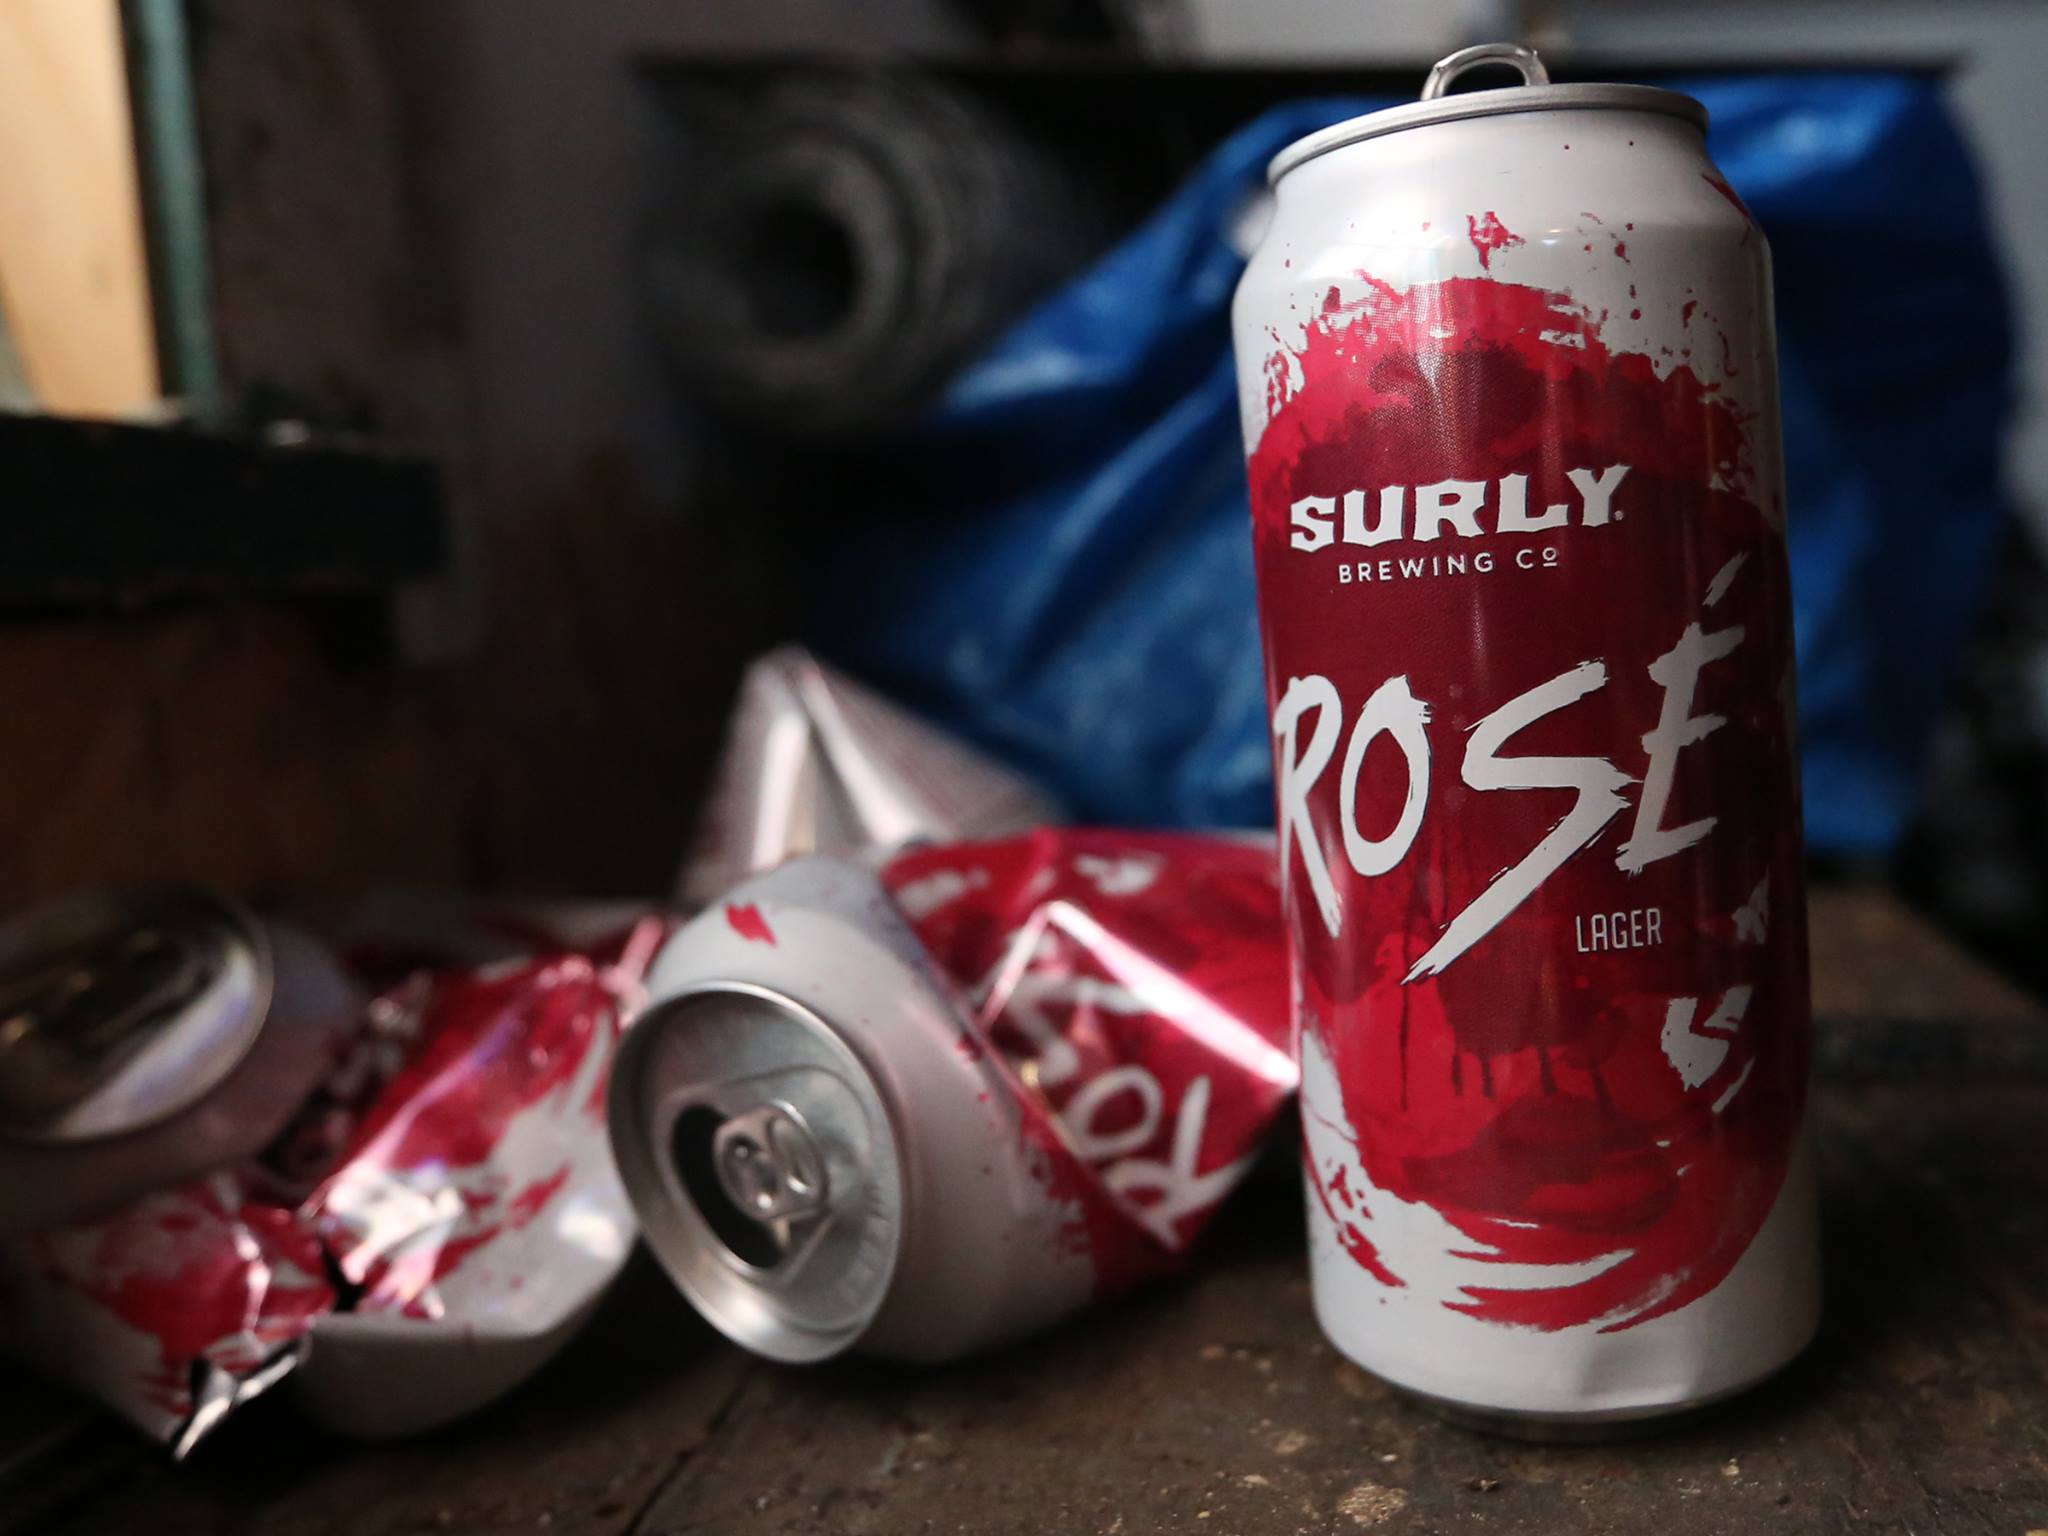 Surly Brewing Co rosé Lager